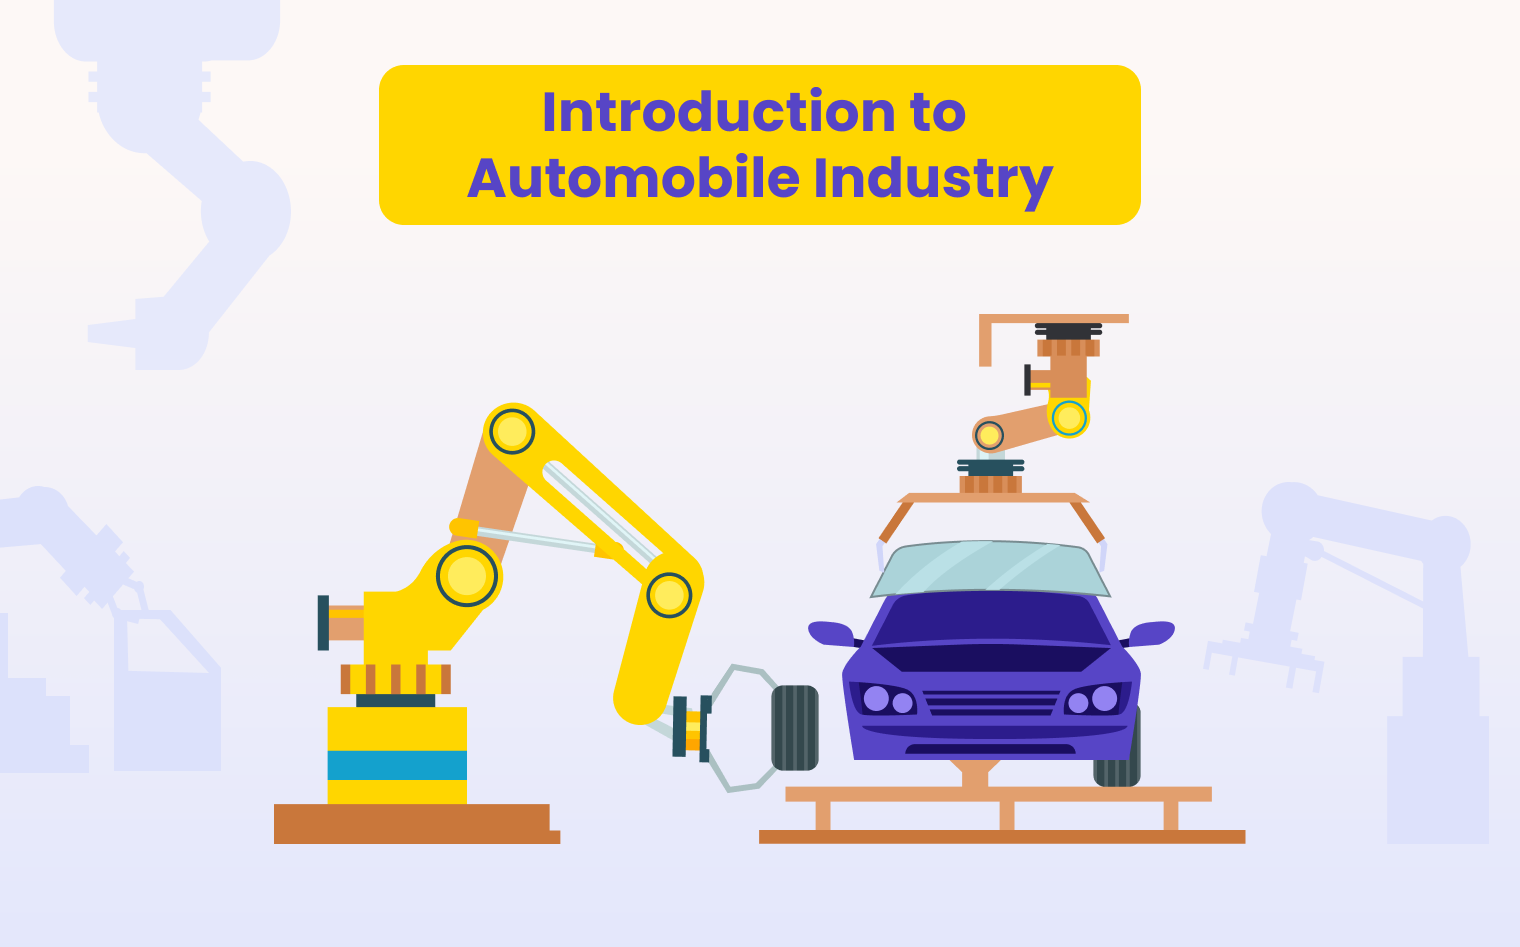 Introduction to Automobile Industry